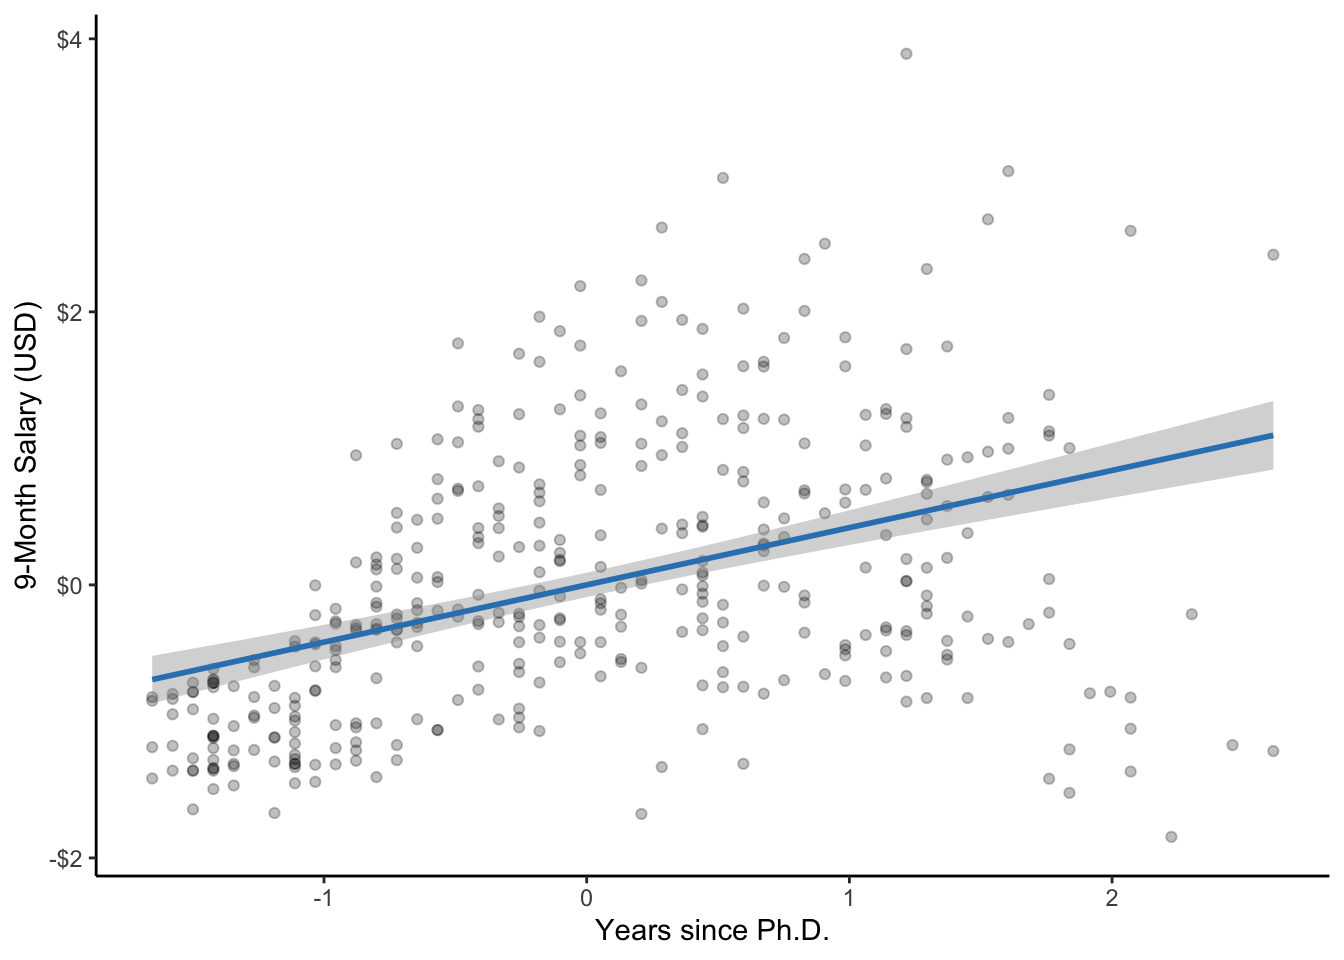 A scatterplot of years since Ph.D. and salary along with the line of best fit. The gray band represents the 95% CI.